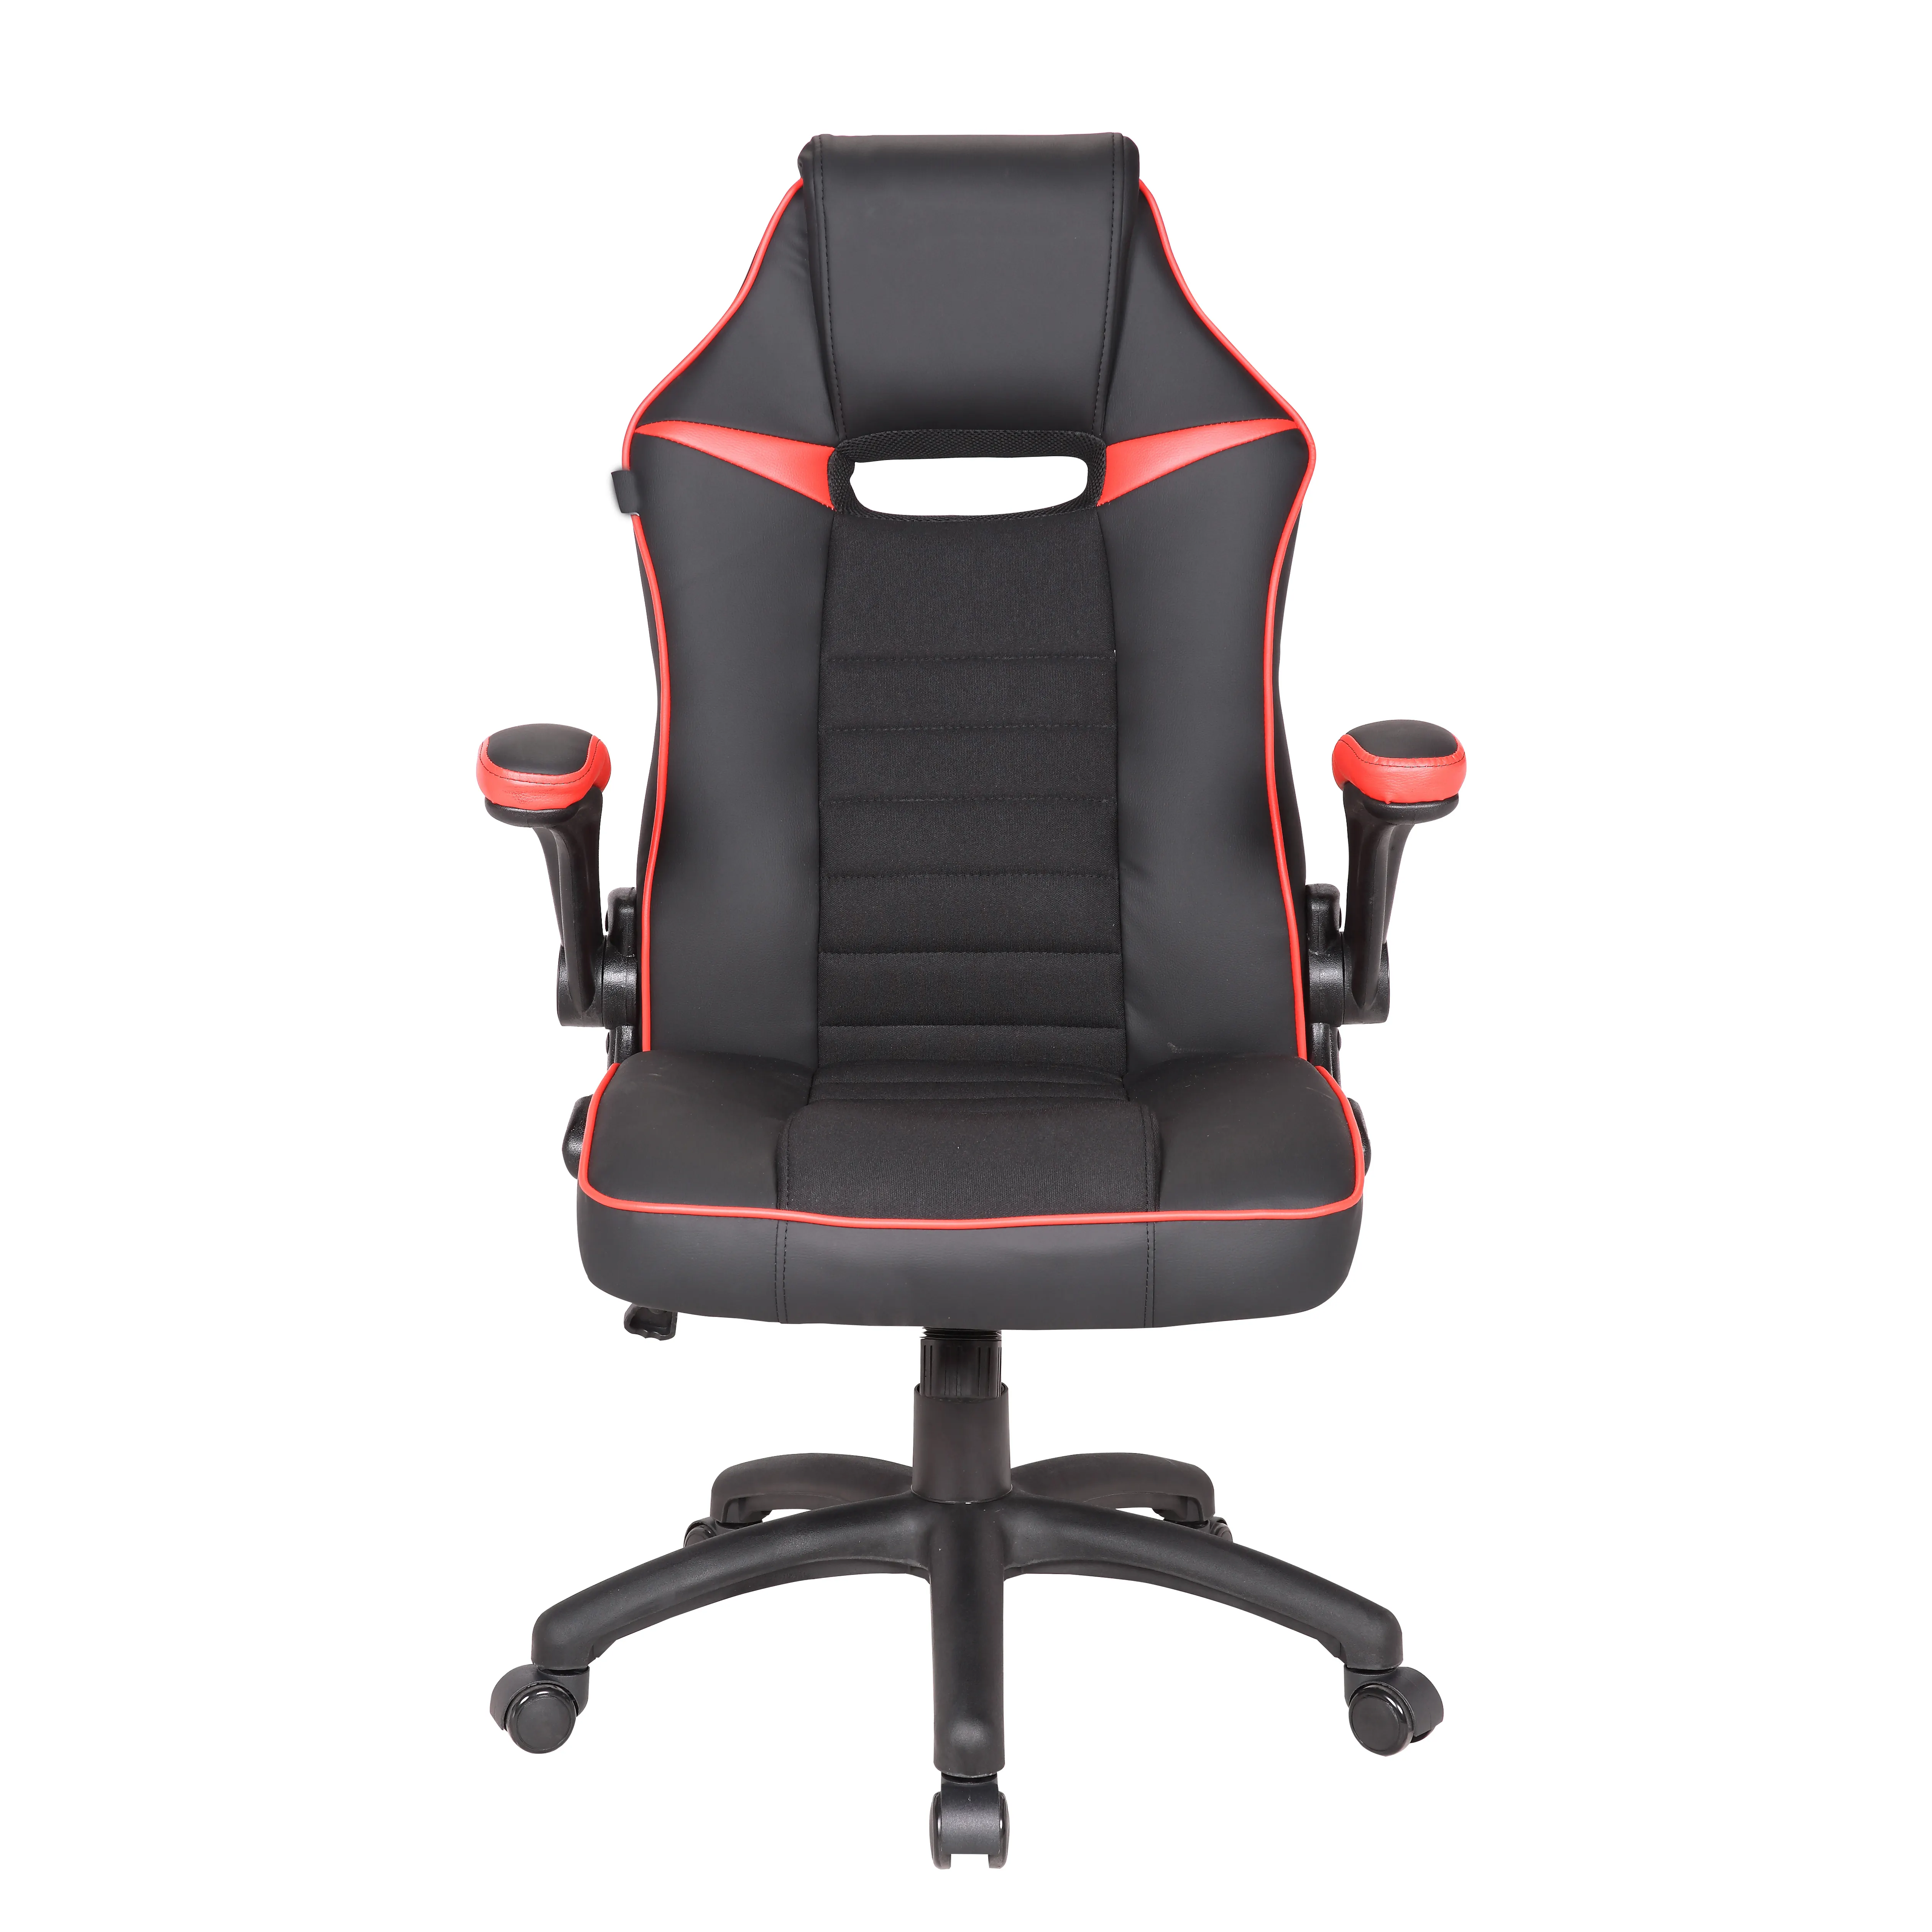 Contemporary Design Style Office Chair with Lifting Seat and High Back Office Chair